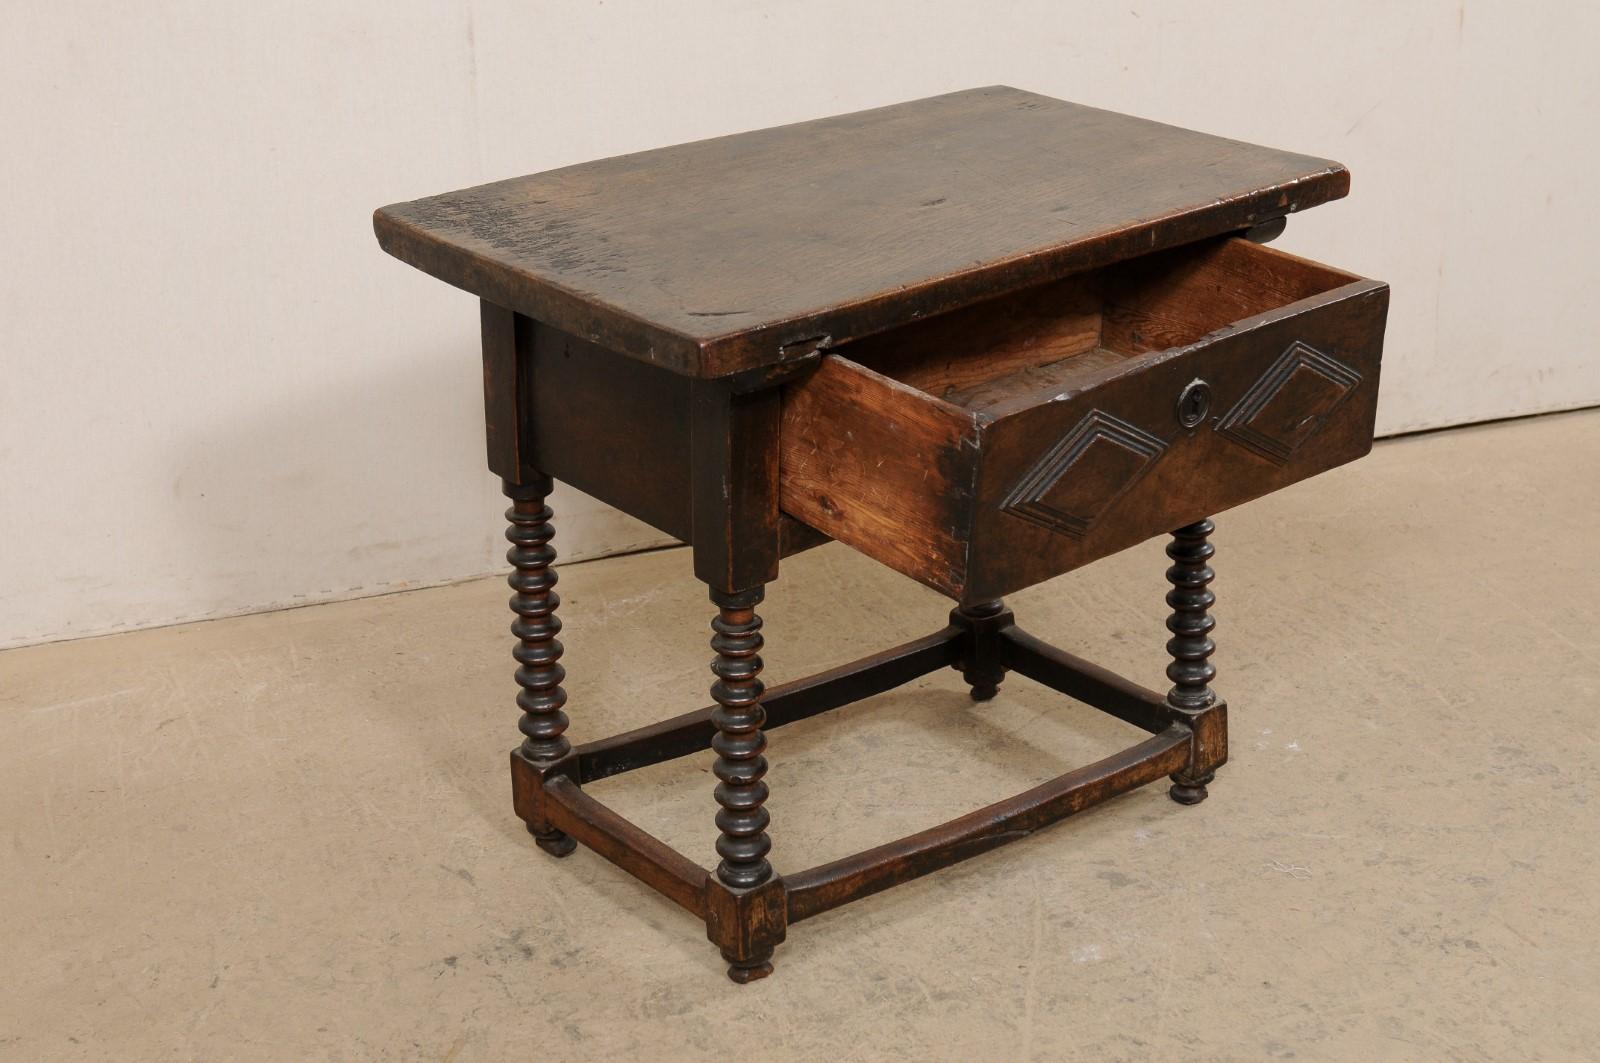 18th Century and Earlier 18th Century Carved-Walnut Occasional Table with Single Drawer from Italy